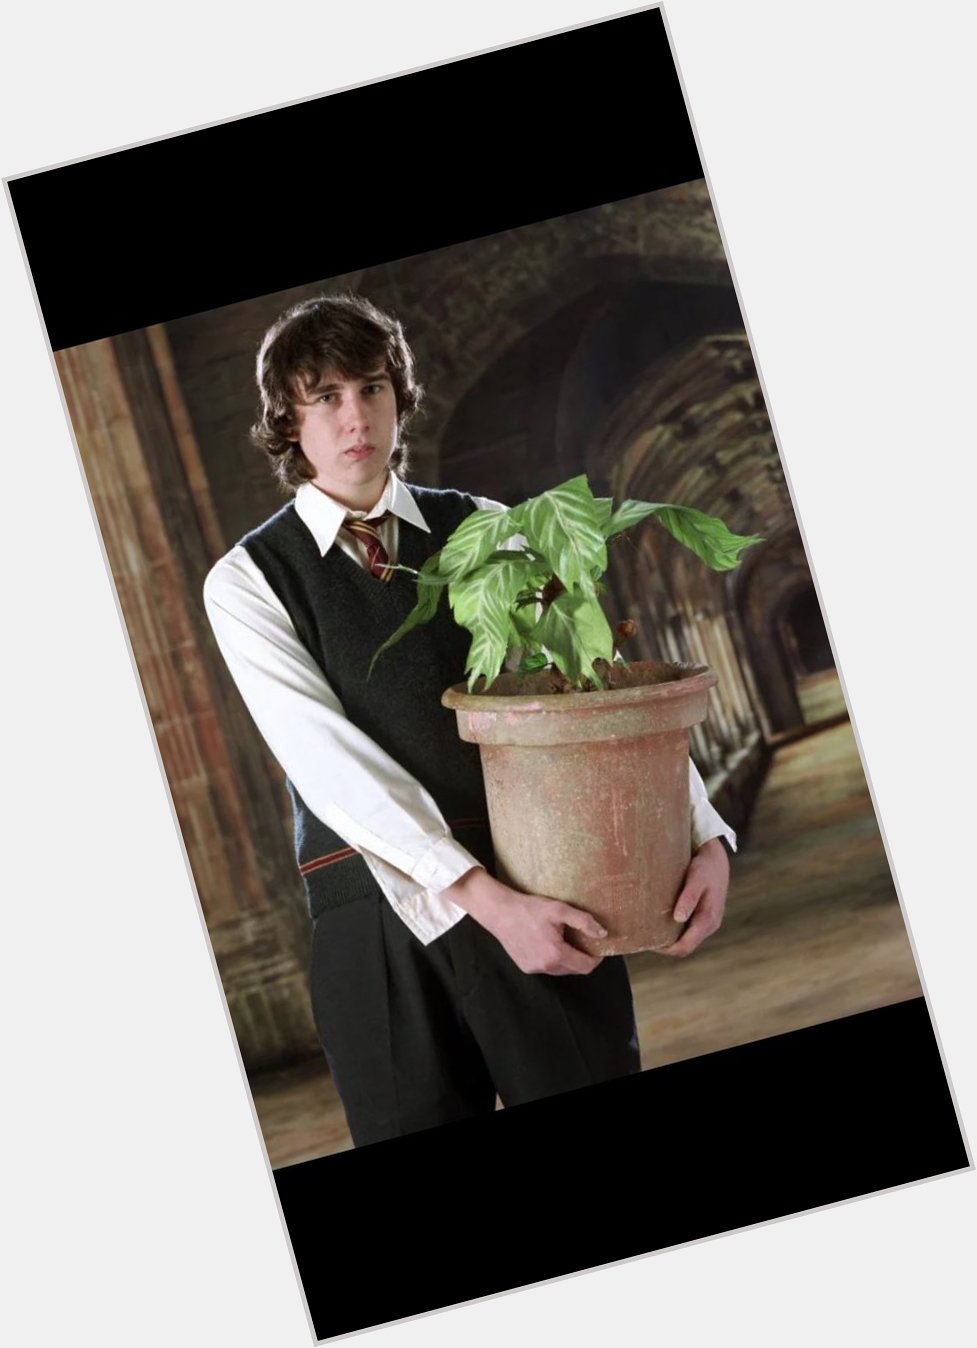 Happy birthday to Neville Longbottom, one of the very first fictional characters I attached myself to 